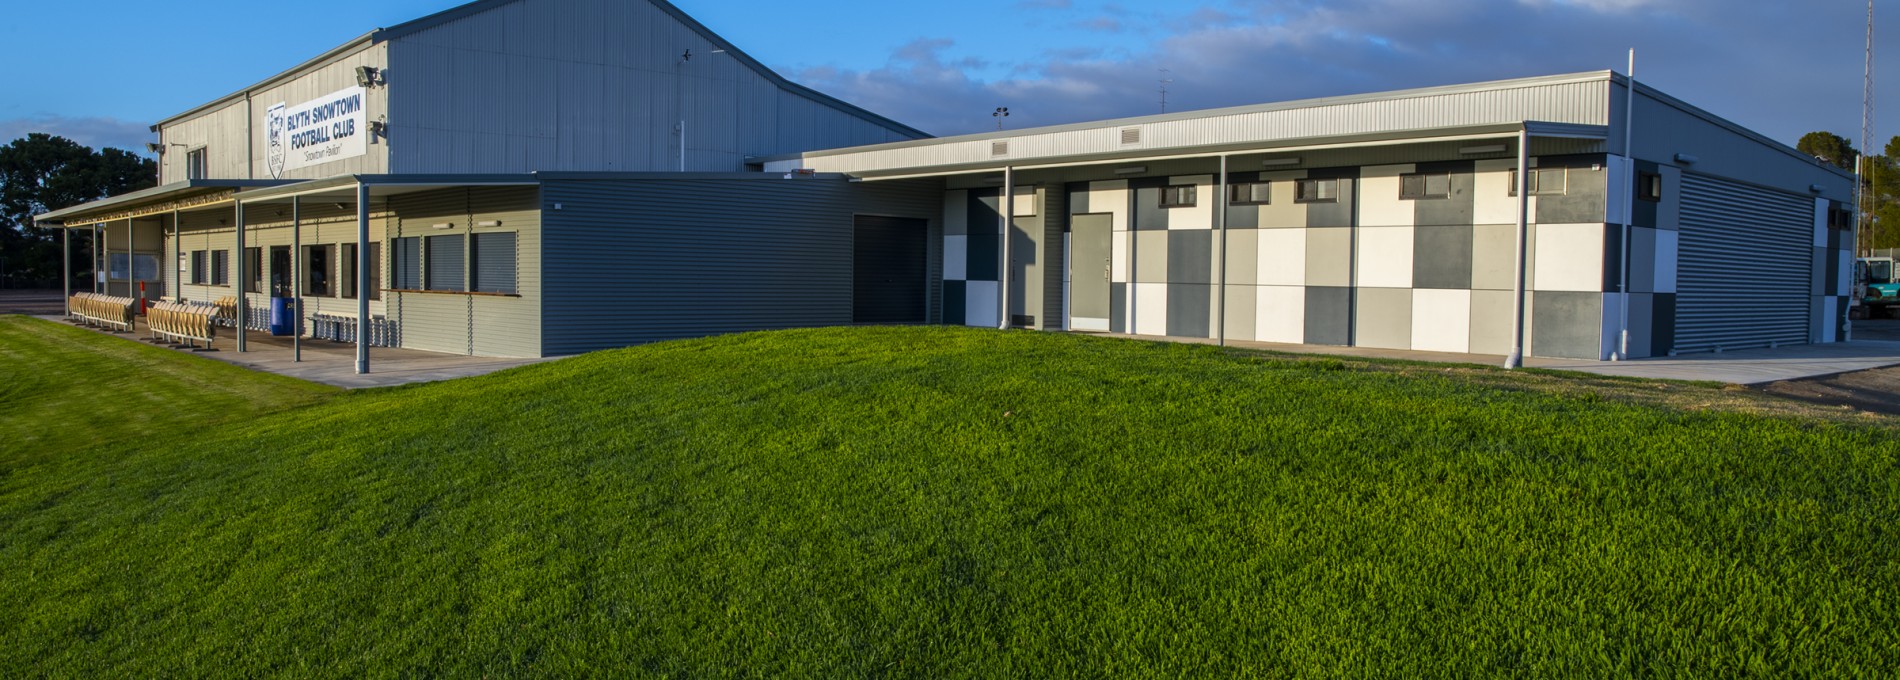 Exterior of Sports Facility with Changerooms in front of Lawn